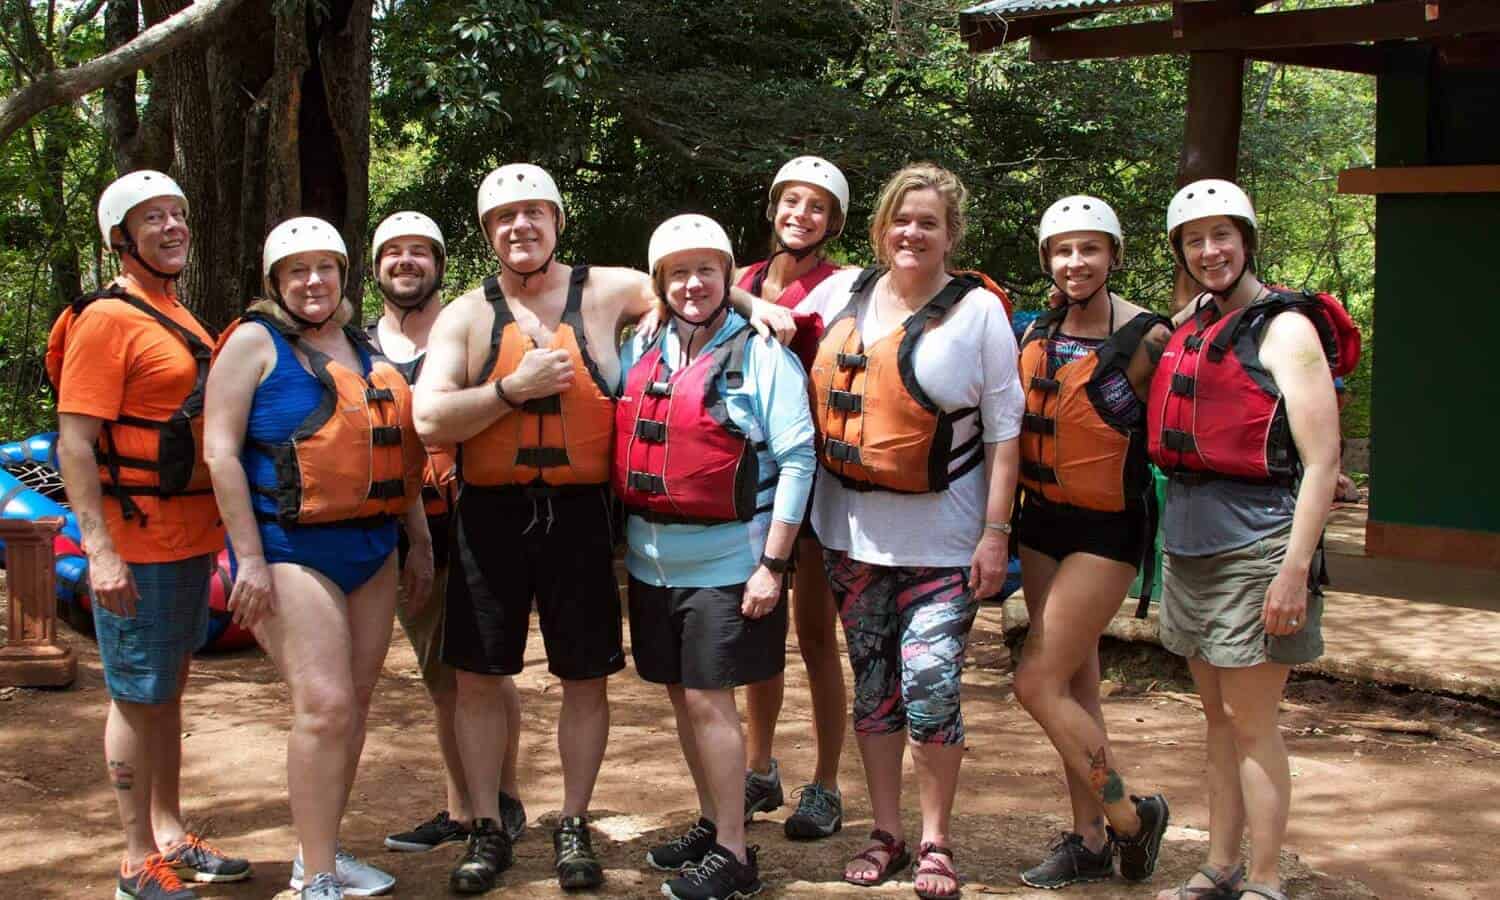 Group photo life vests at Mountainside Treatment Center Alumni 2017 Costa Rica trip